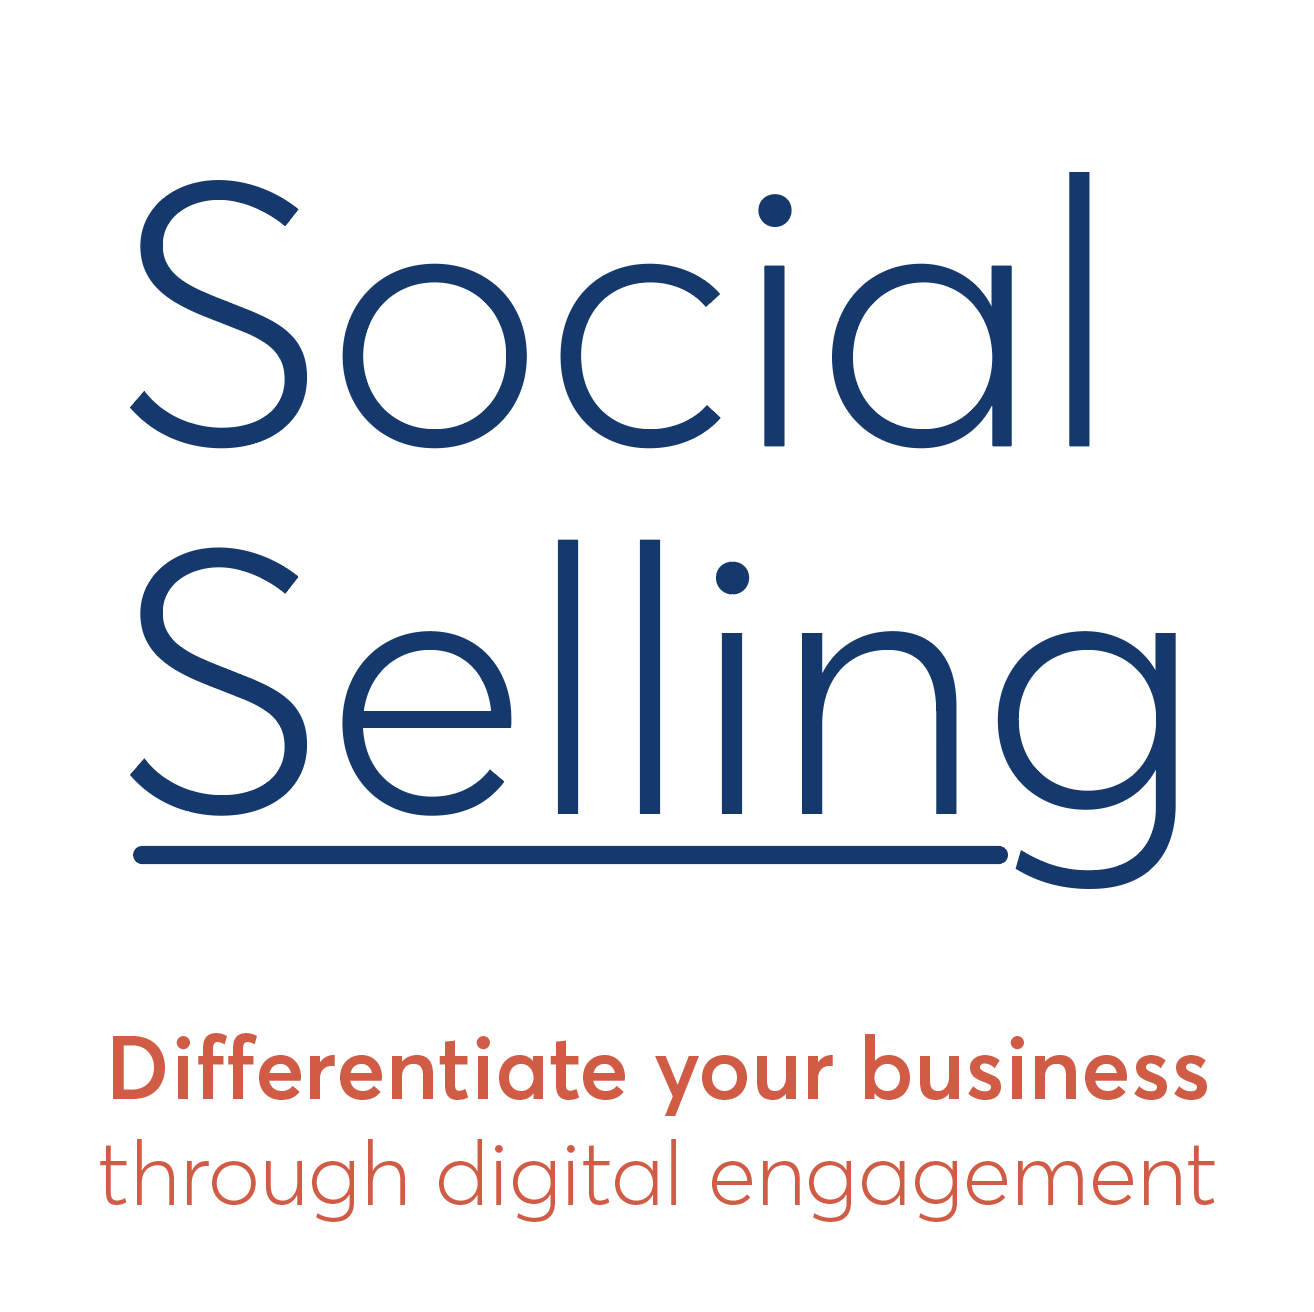 Social selling differentiate your business through digital engagement logo